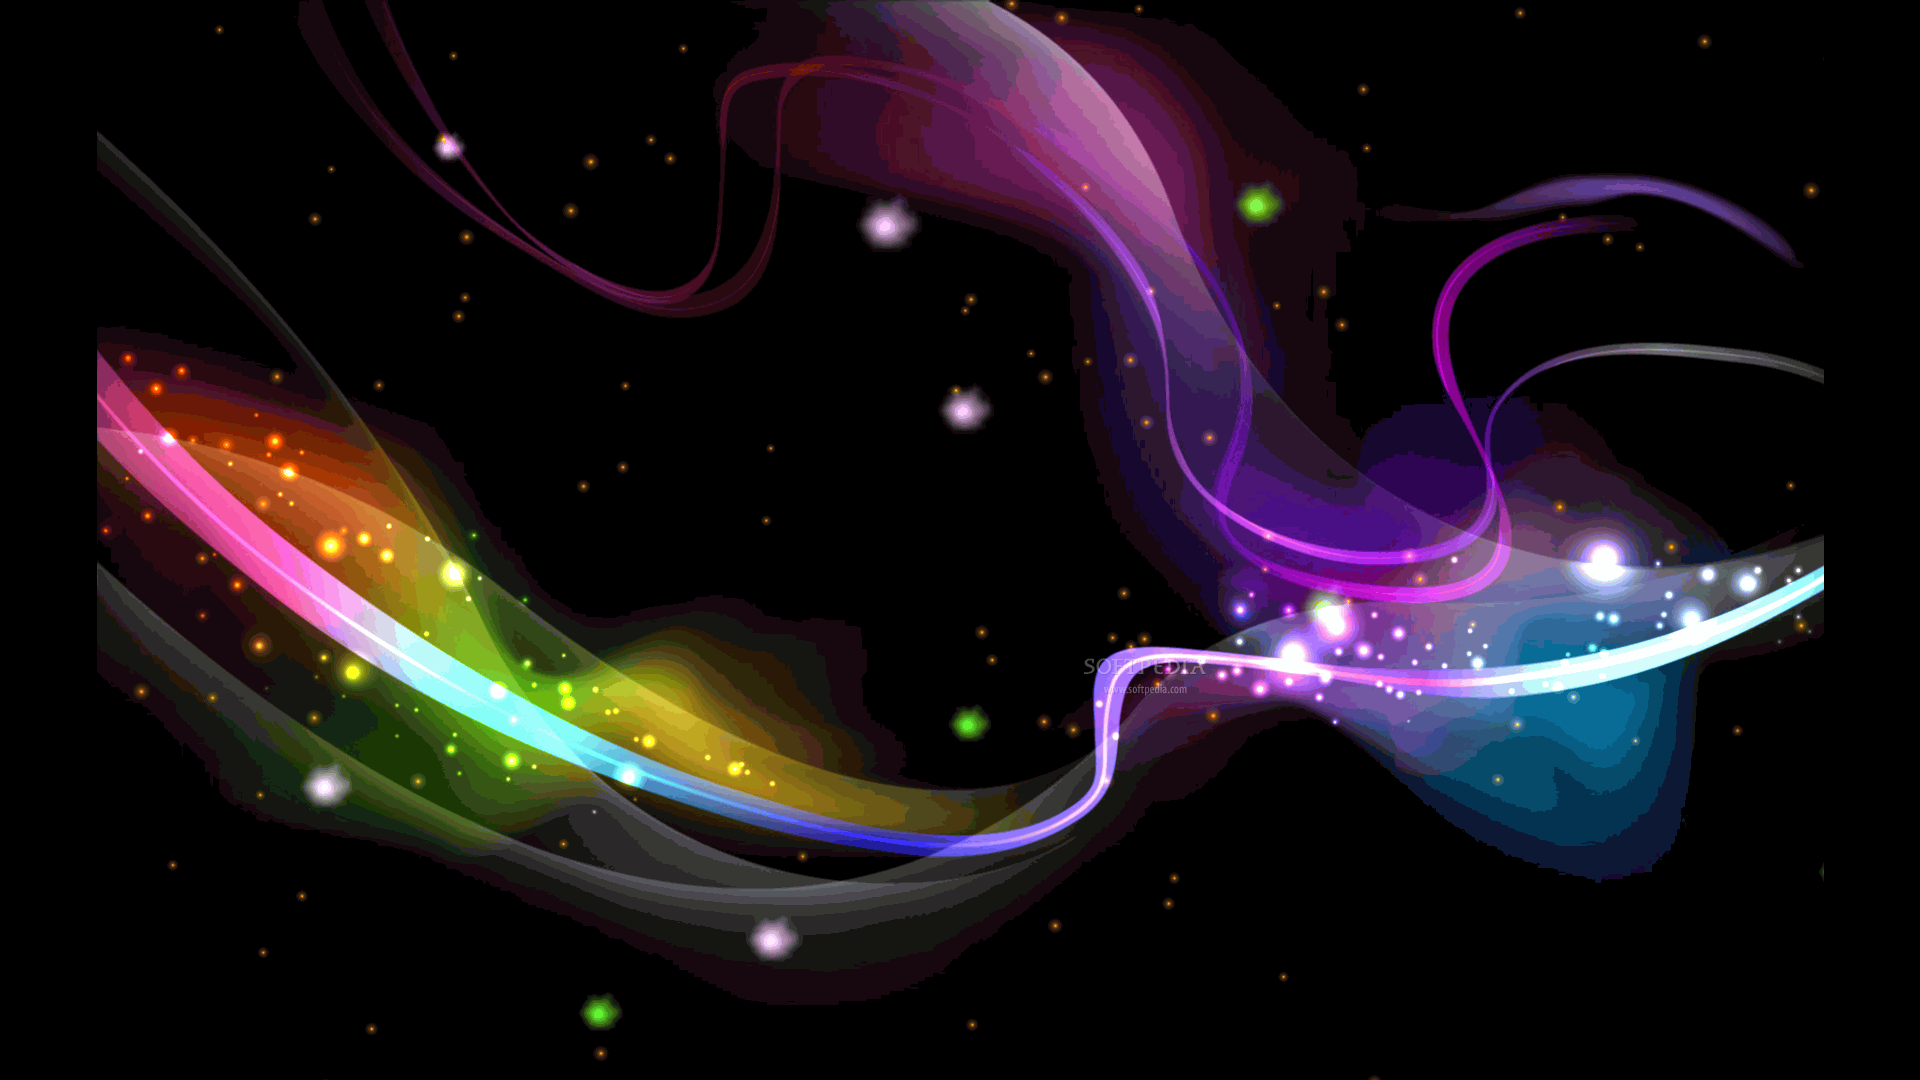 Free 3d Wallpapers And Screensavers - Moving Wallpaper For Pc Free Download  - 1920x1080 Wallpaper 